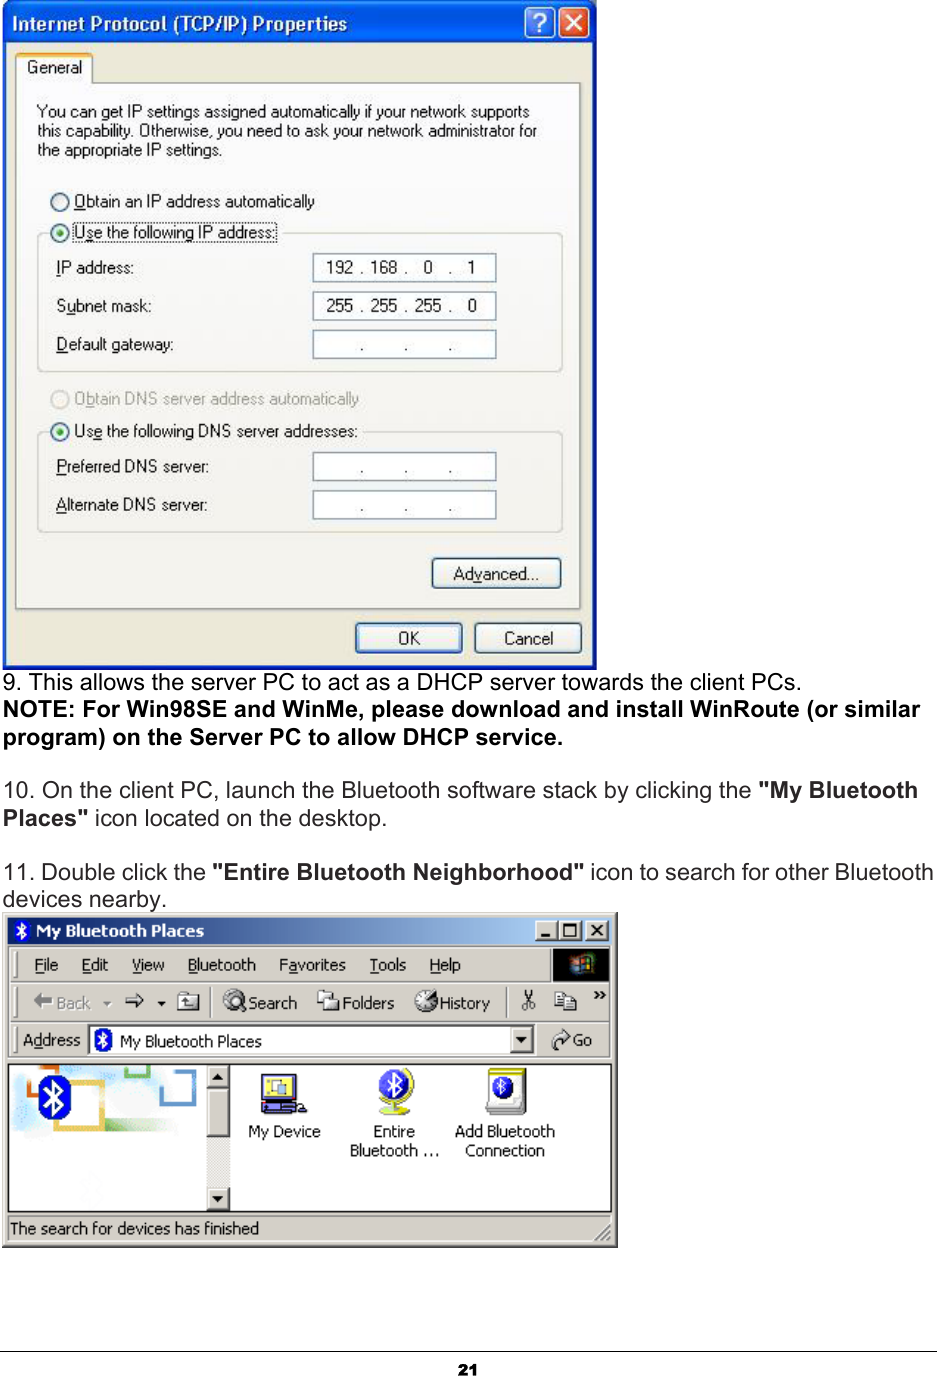   21 9. This allows the server PC to act as a DHCP server towards the client PCs.  NOTE: For Win98SE and WinMe, please download and install WinRoute (or similar program) on the Server PC to allow DHCP service.  10. On the client PC, launch the Bluetooth software stack by clicking the &quot;My Bluetooth Places&quot; icon located on the desktop.  11. Double click the &quot;Entire Bluetooth Neighborhood&quot; icon to search for other Bluetooth devices nearby.  